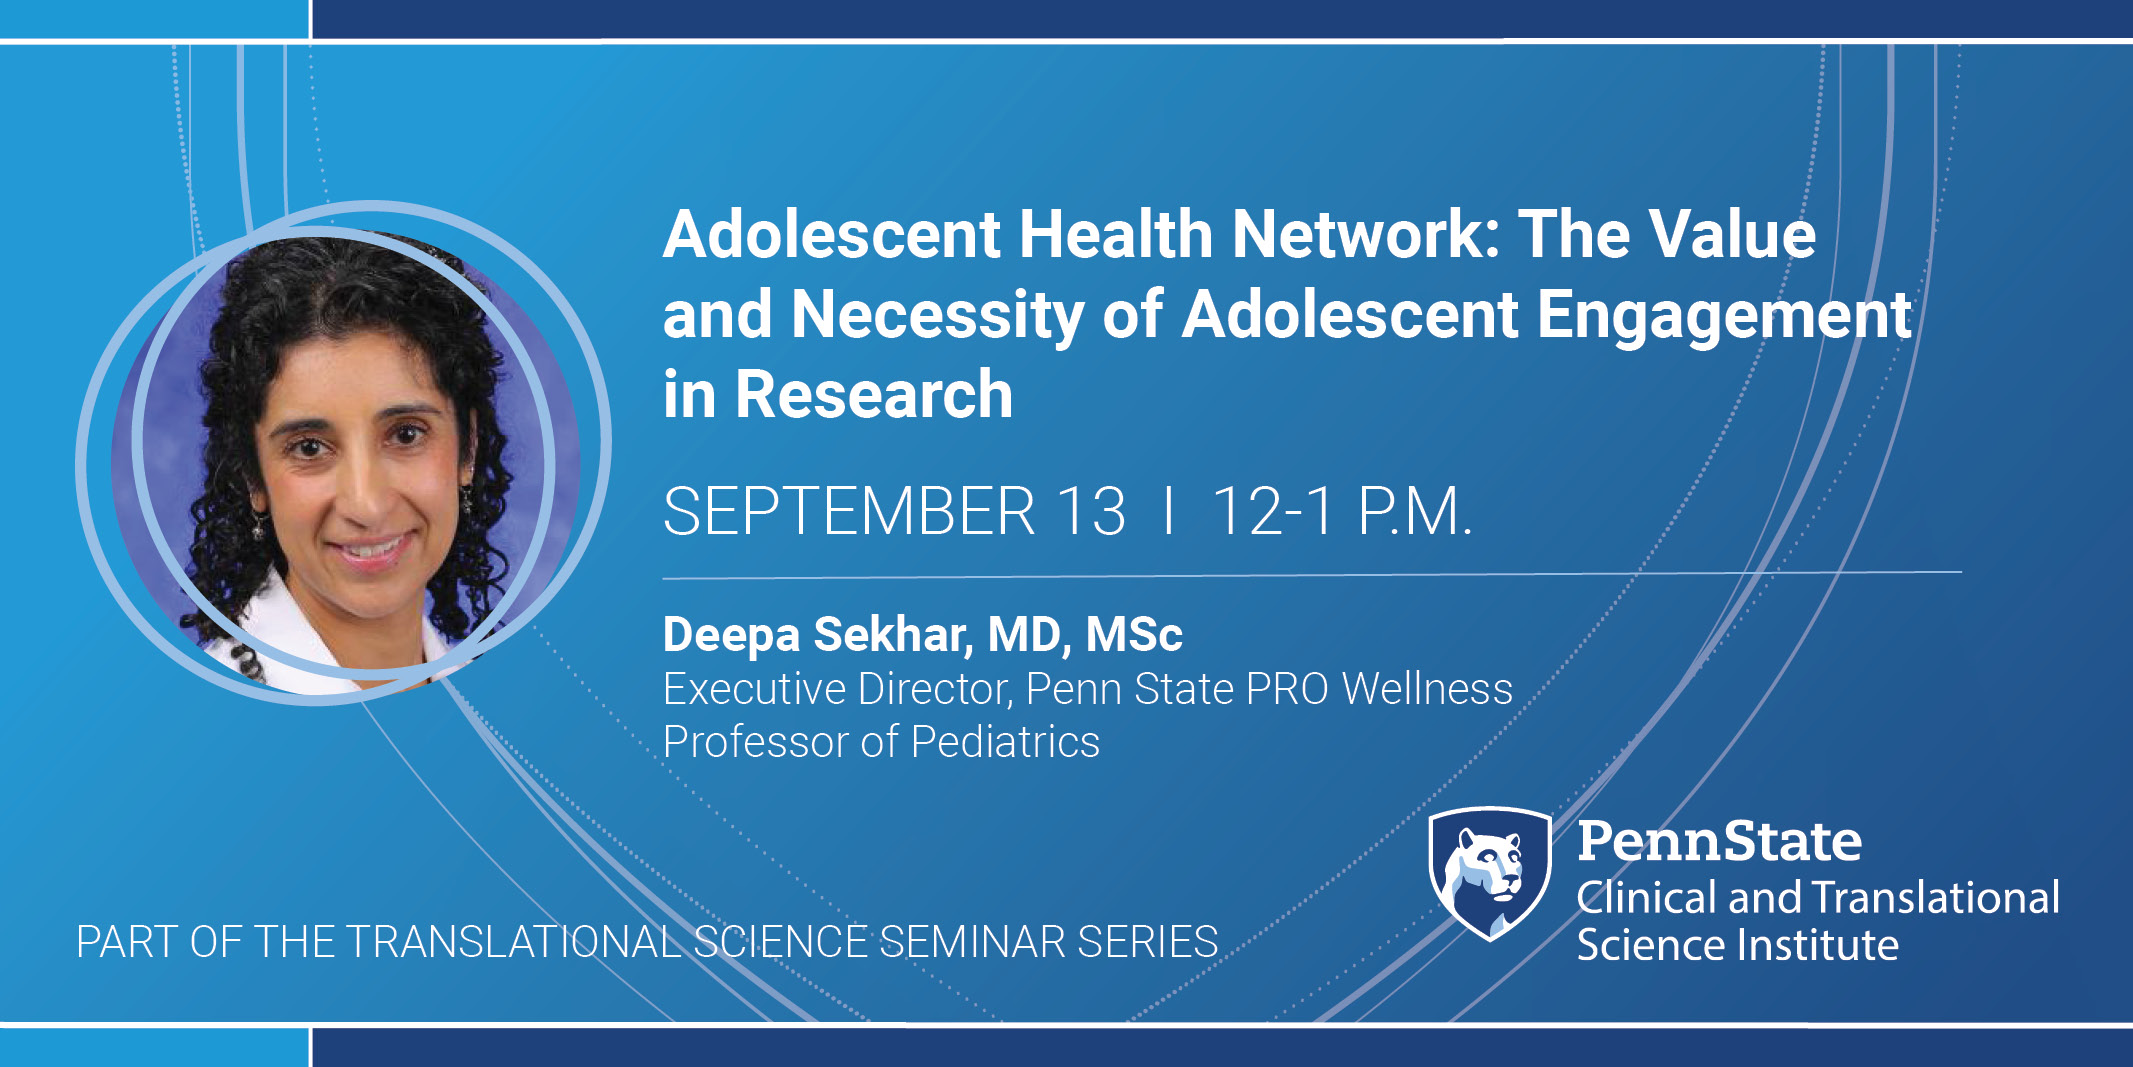 The Adolescent Health Network: The value and necessity of adolescent engagement in research presented by Deepa Sekhar, MD, MSc